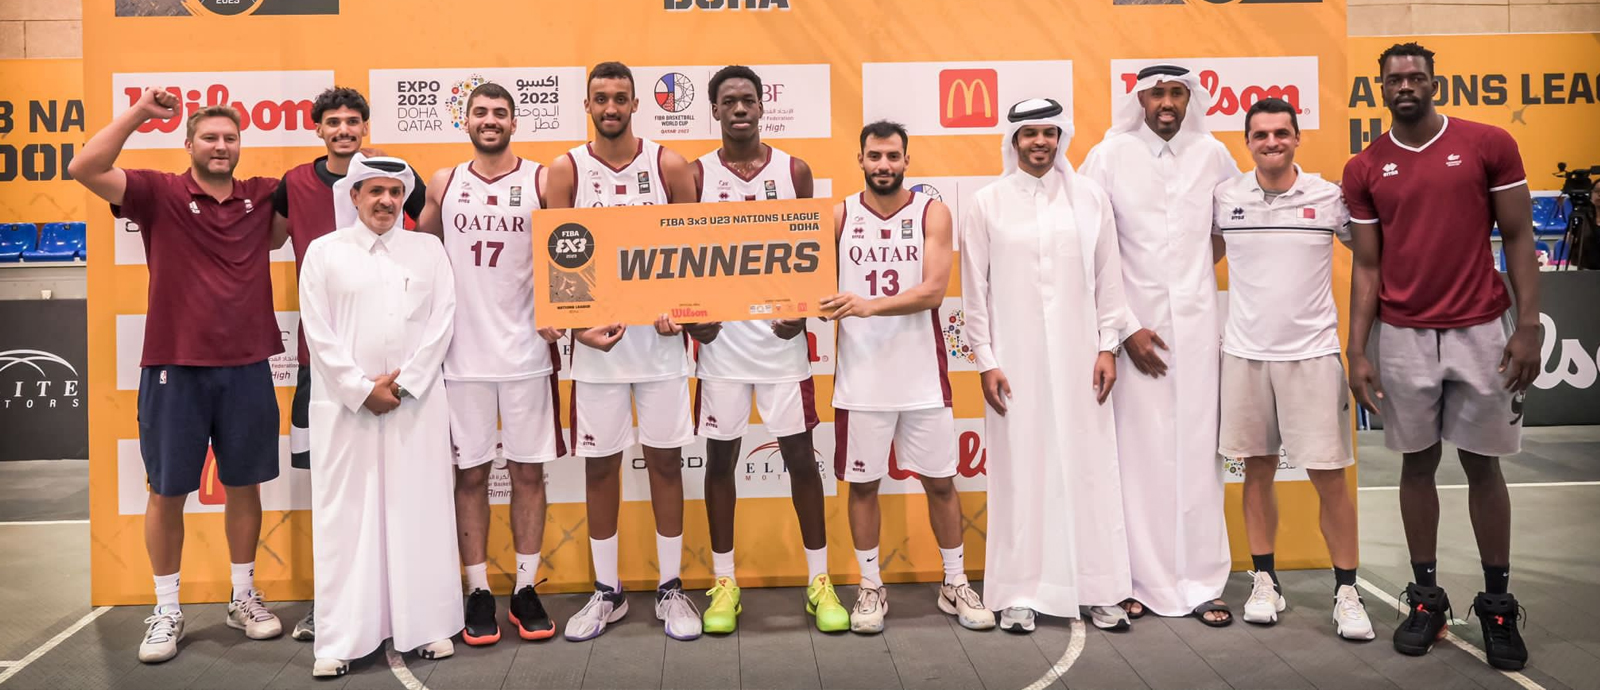 Qatar wins West Asia Conference